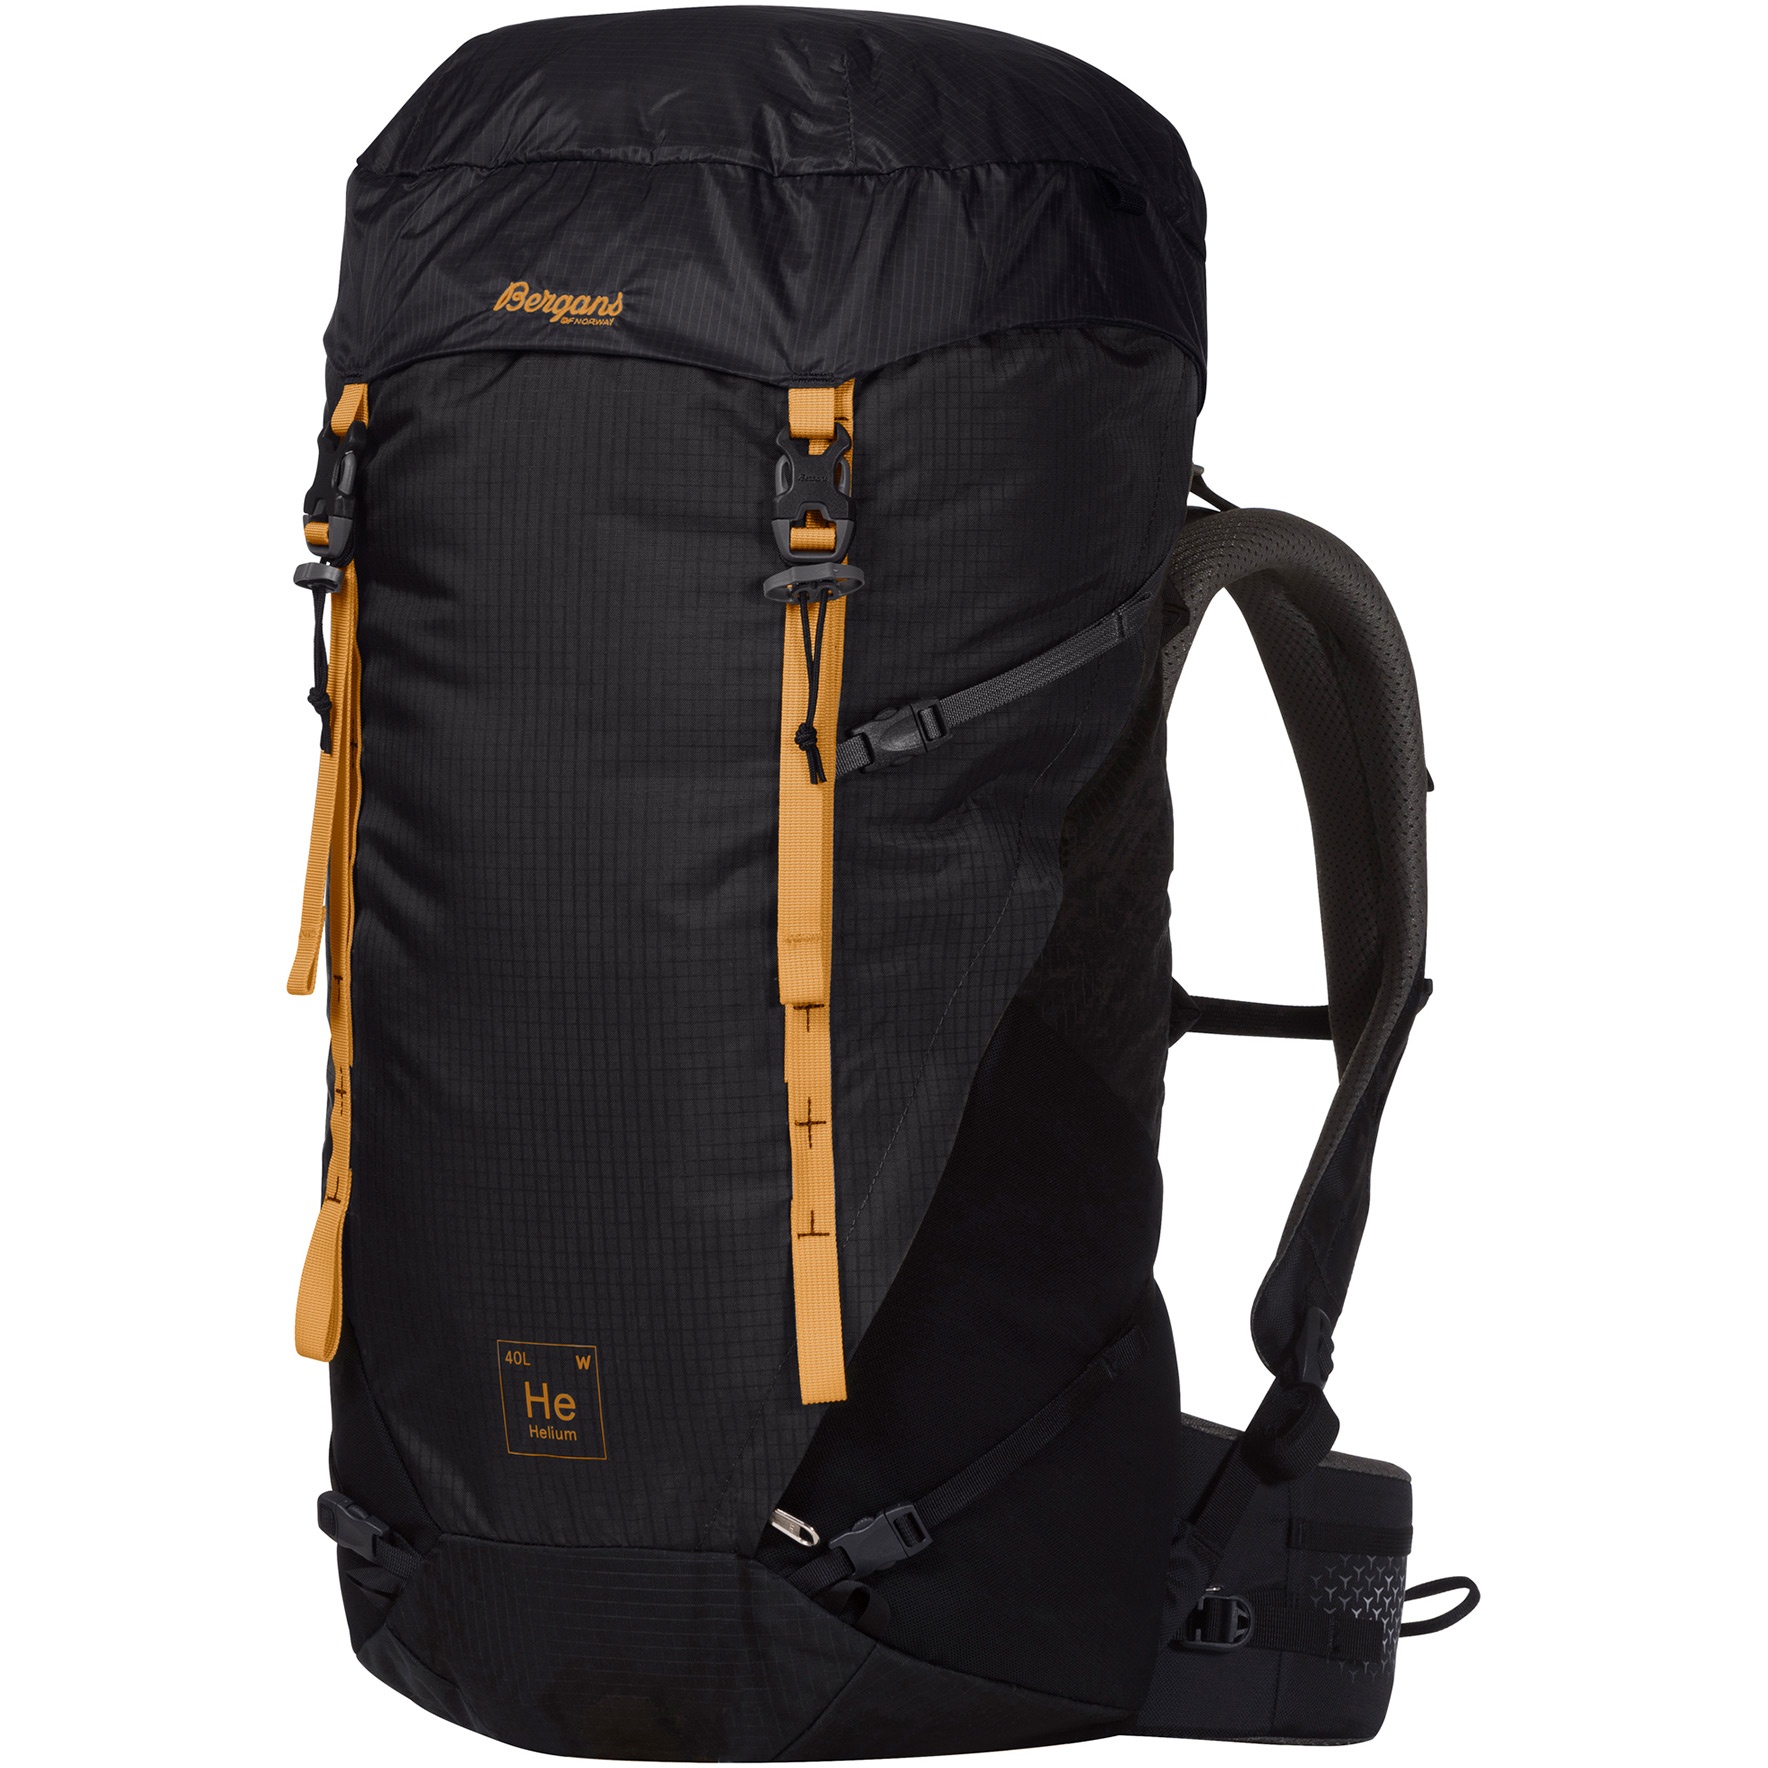 Picture of Bergans Helium V5 40L Backpack - dark shadow grey/black/golden yellow